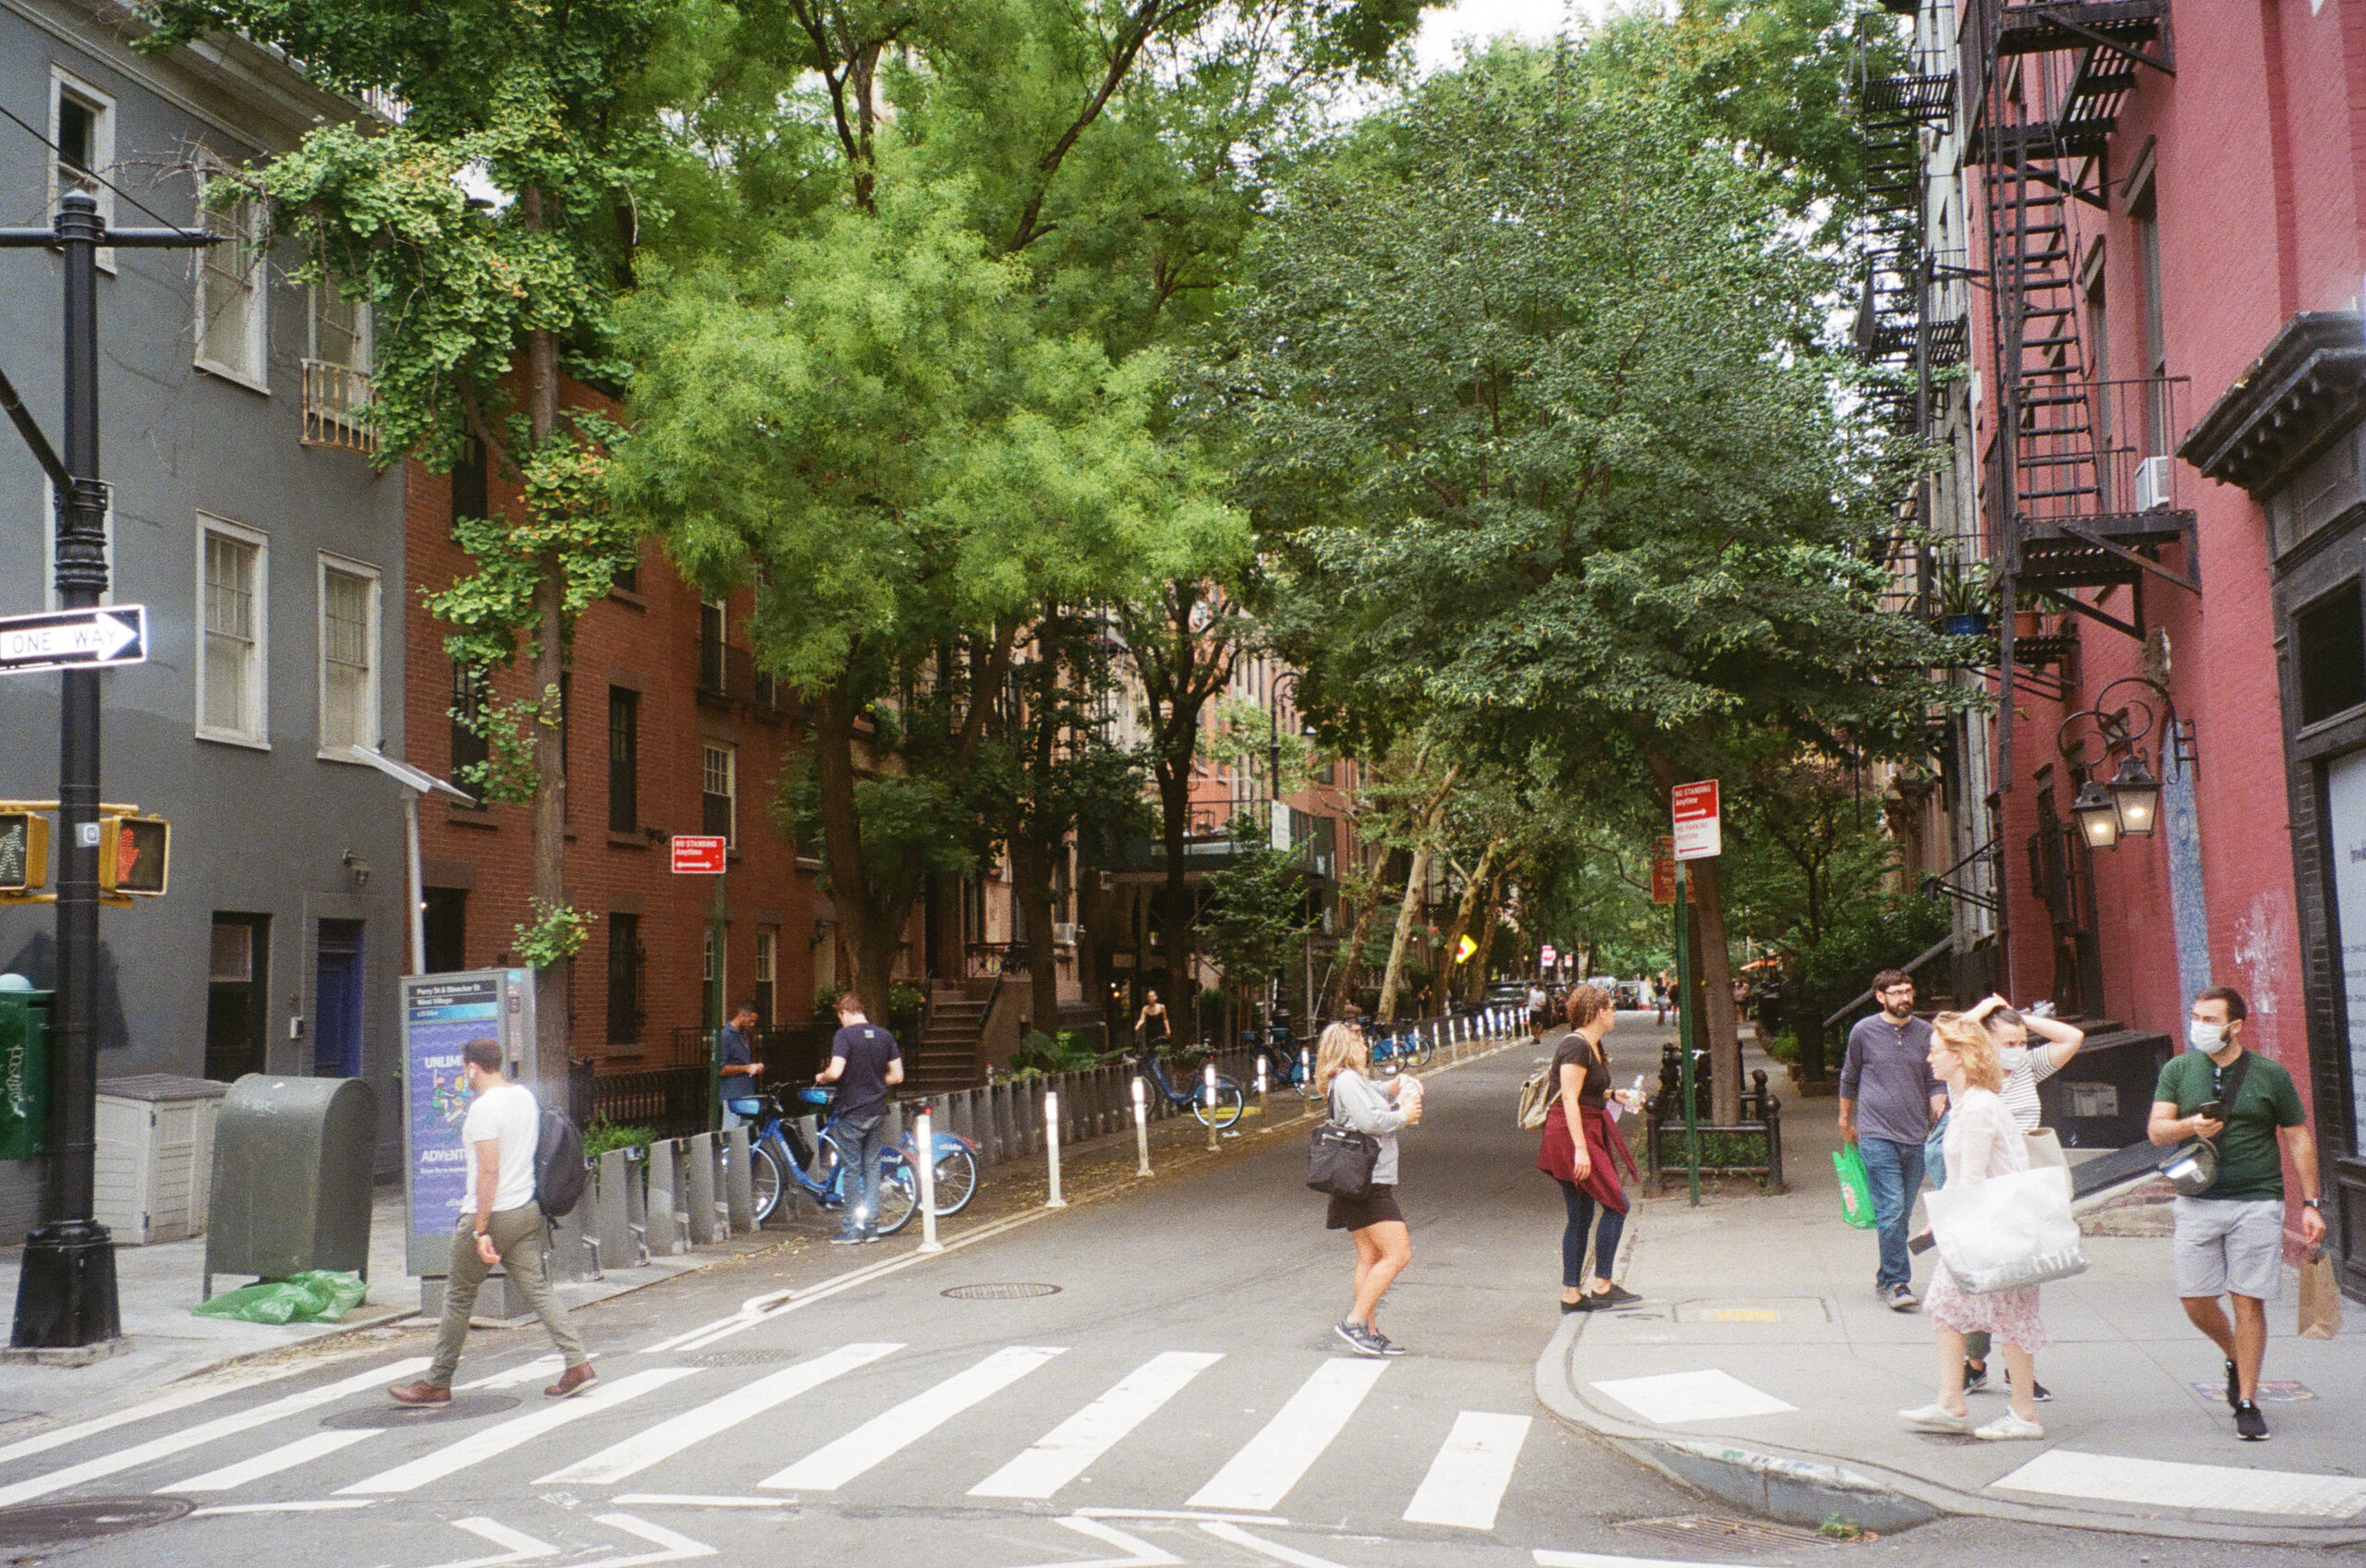 A busy street in the West Village